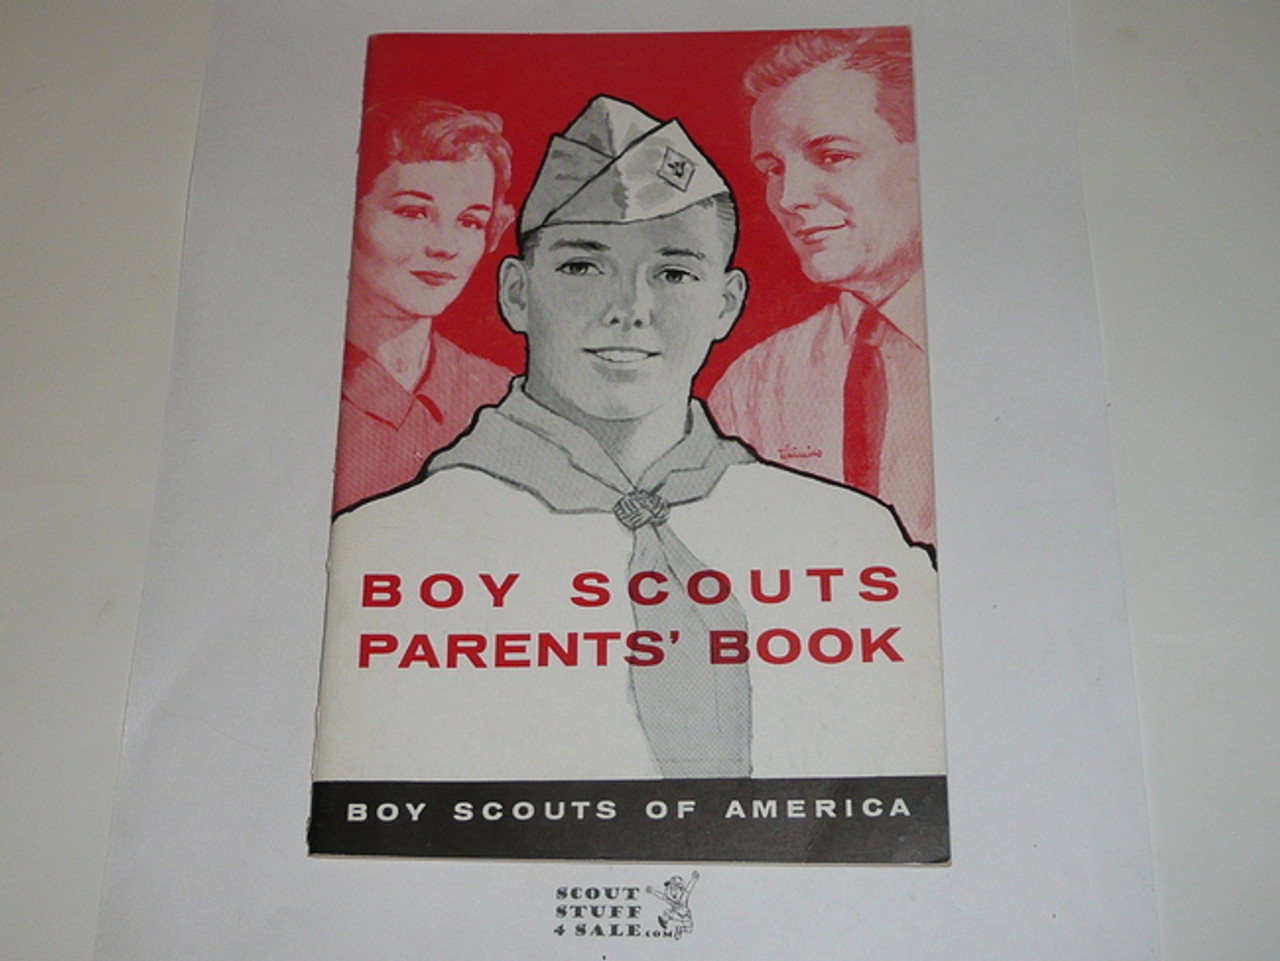 Boy Scouts Parents' Book, 12-67 Printing